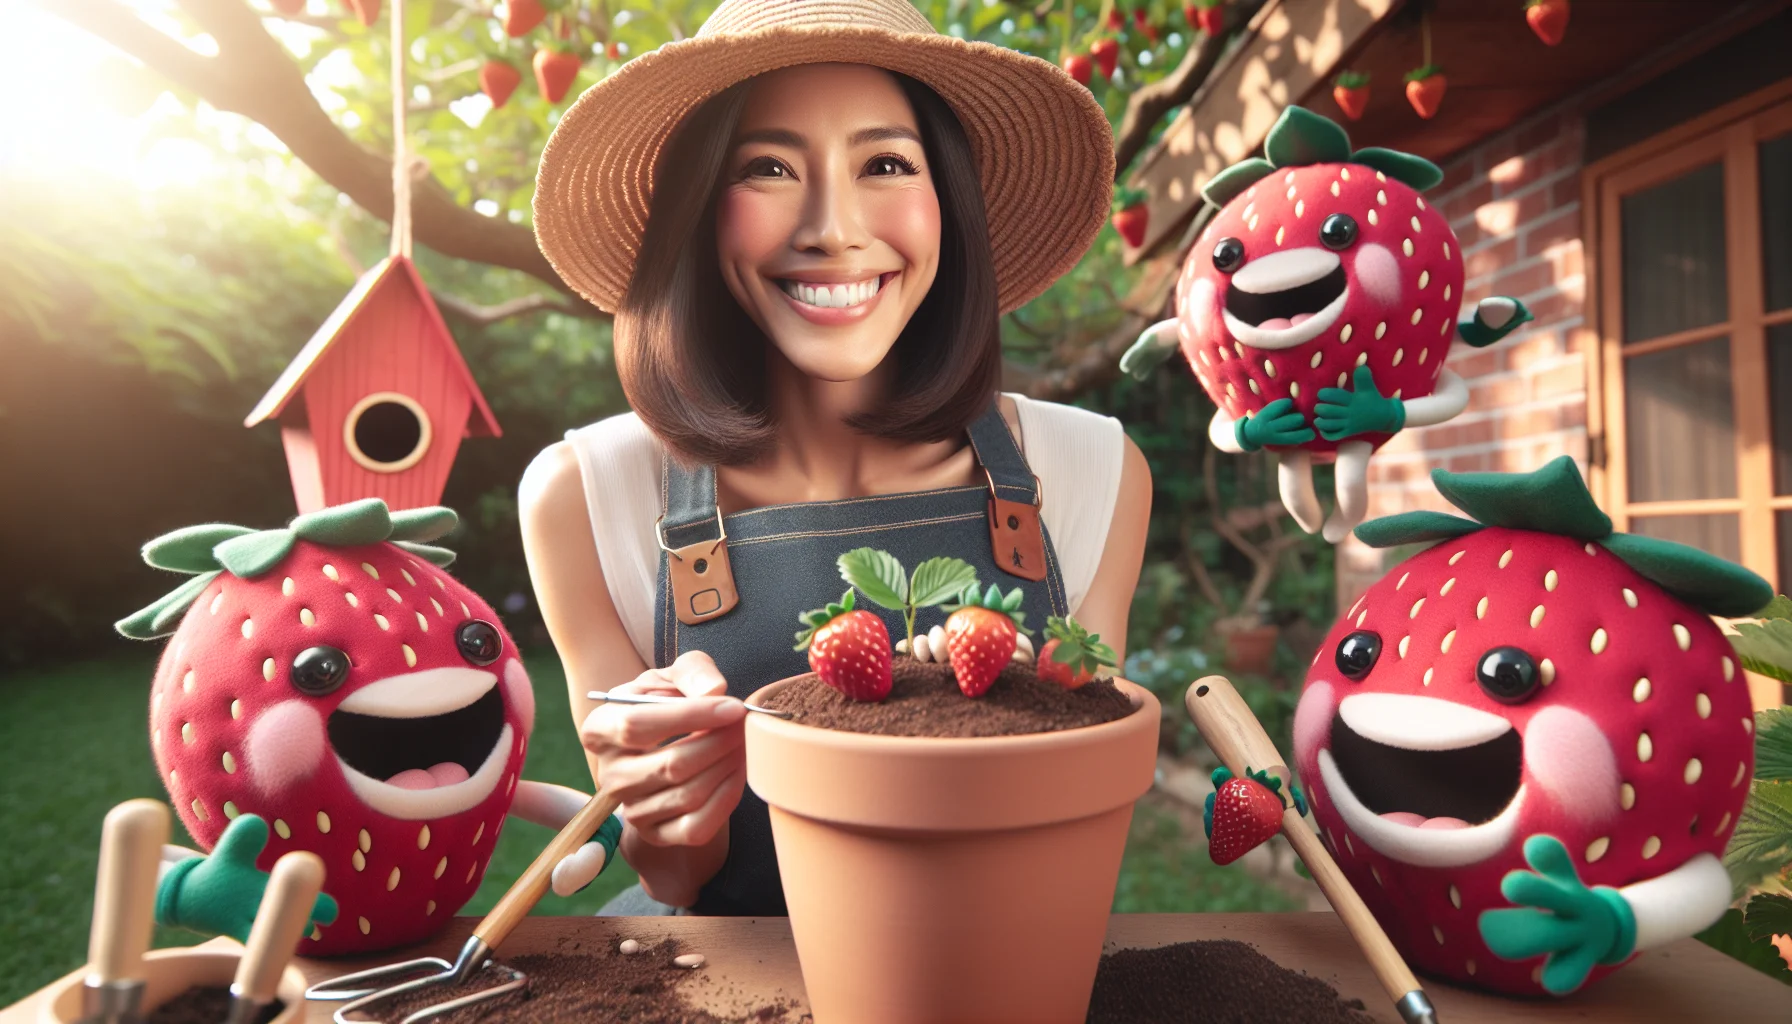 Create a playful and humorous image of a gardening lesson, as demonstrated by a South Asian female gardener with a radiant smile on her face. She's wearing a straw hat and an apron full of gardening tools, gently embedding a handful of strawberry seeds into fluffy, rich soil inside a terracotta pot, while a group of anthropomorphic strawberries cheer her on from the side. The surroundings hint at a sunny afternoon in the backyard, with a birdhouse hanging above from an apple tree, adding to the idyllic scene.